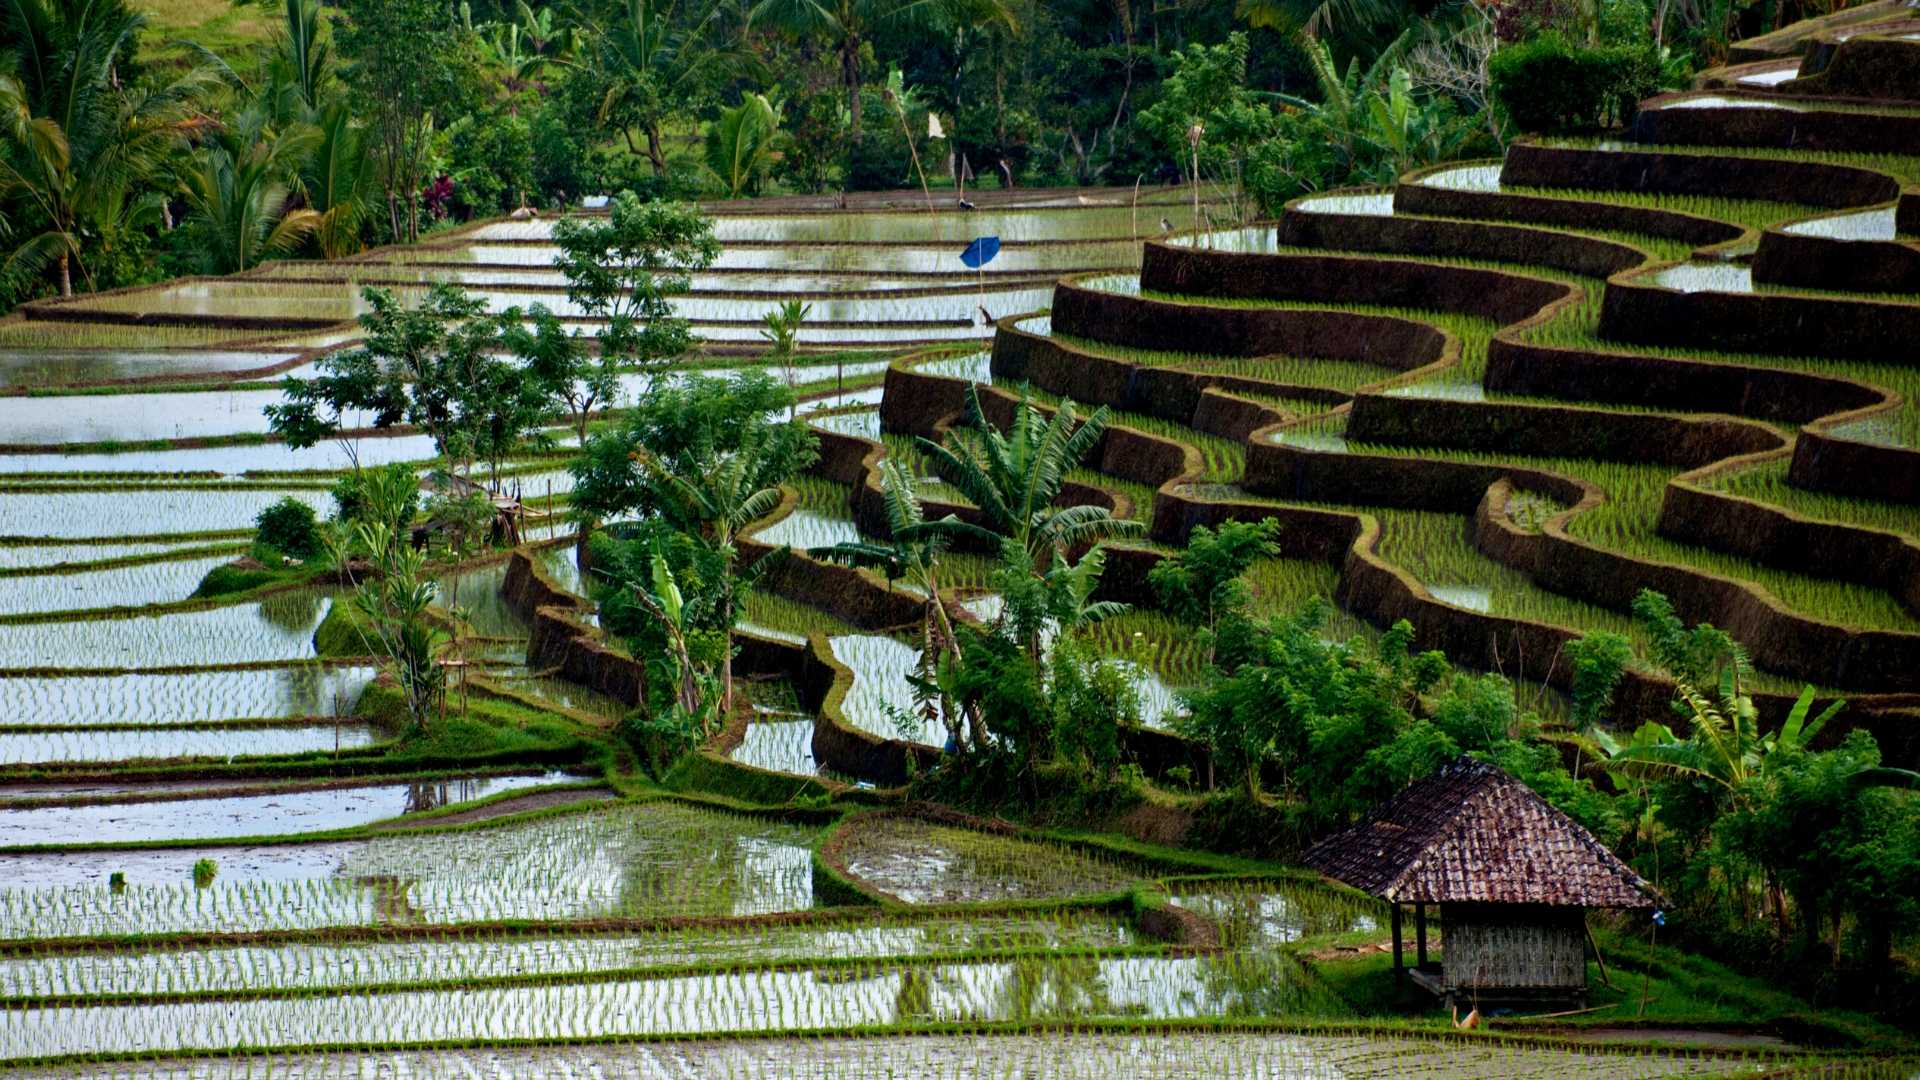 The water management system in Bali's rice paddies is known as Subak